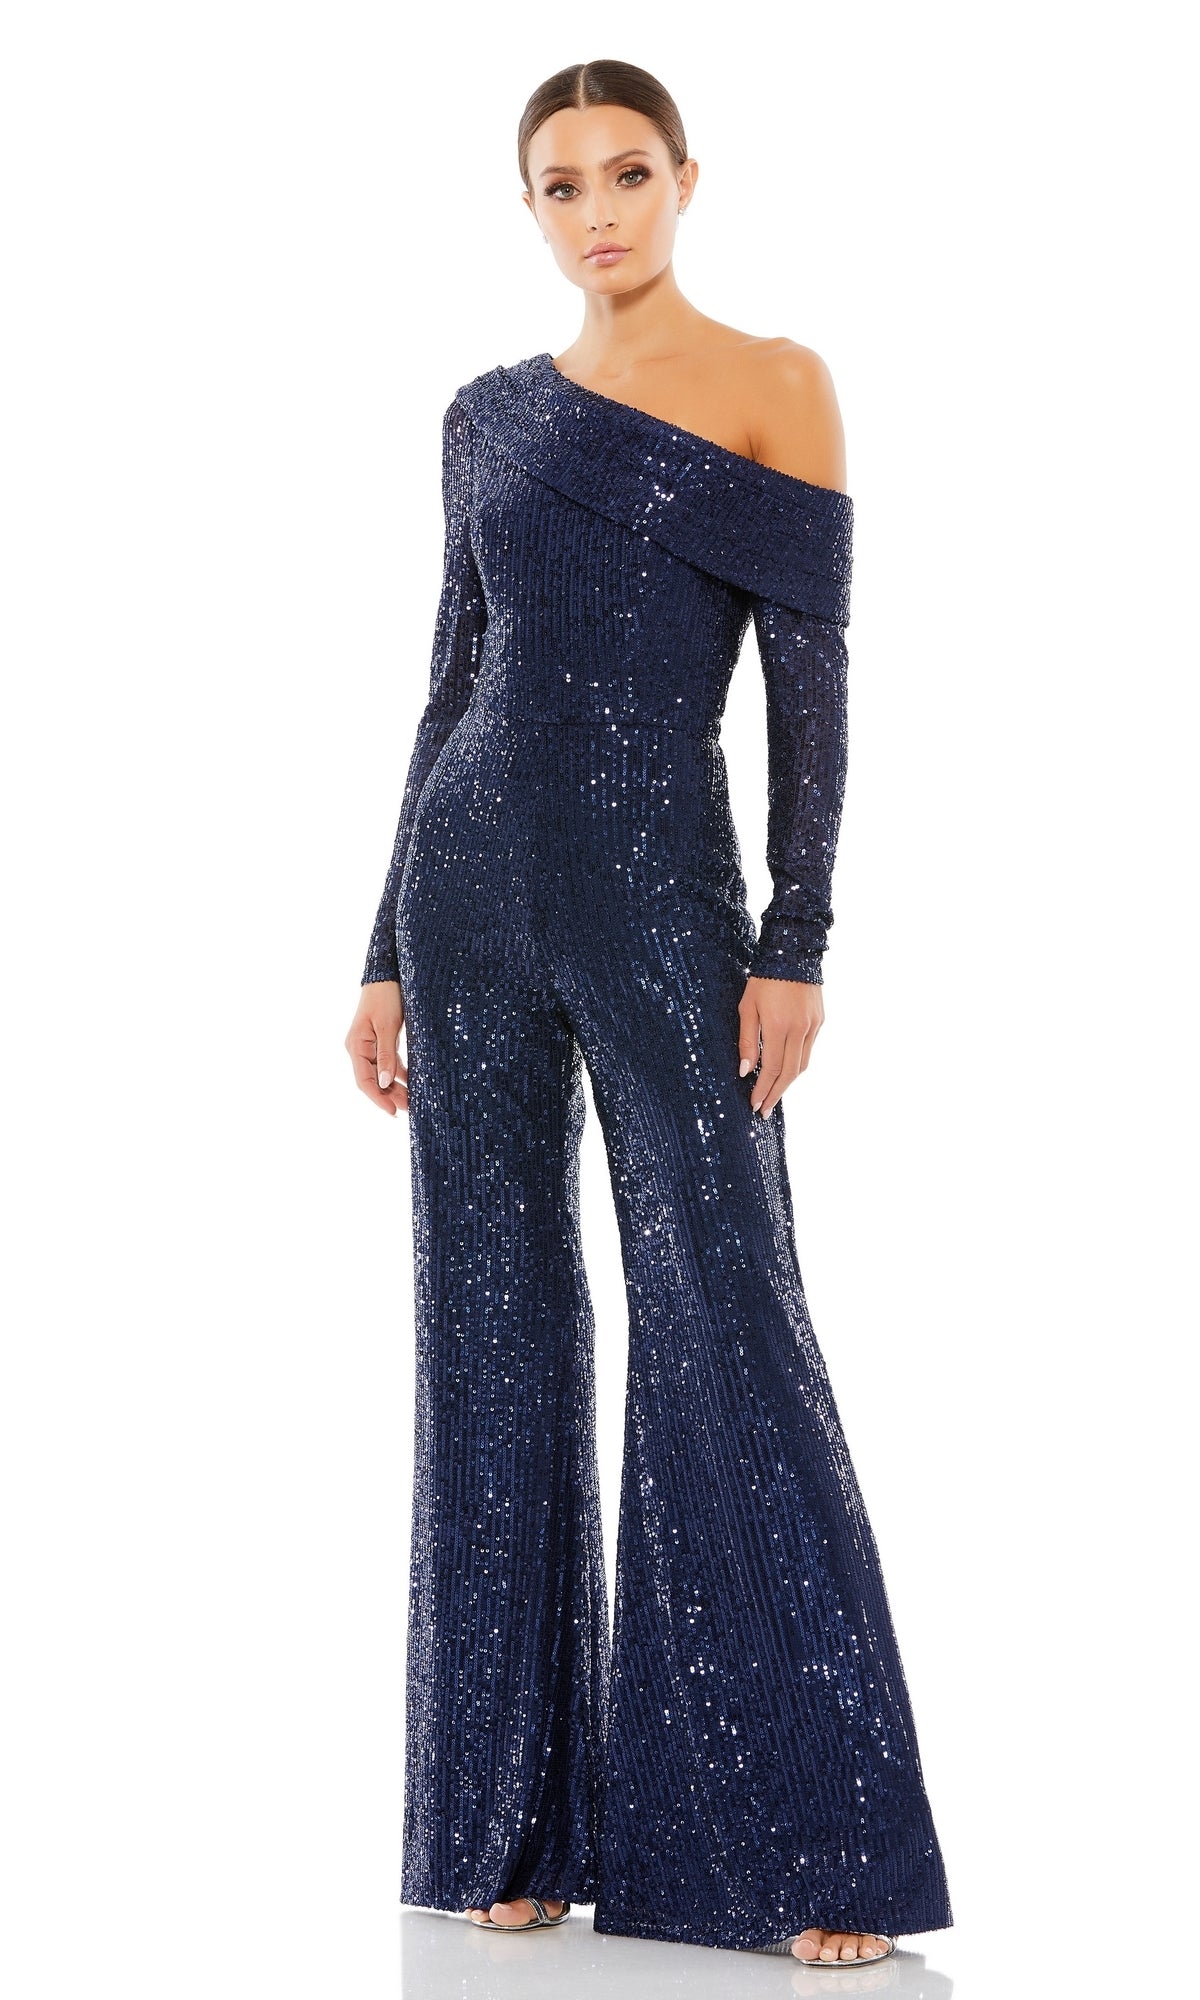 Sequin Formal Jumpsuit 26596 by Mac Duggal